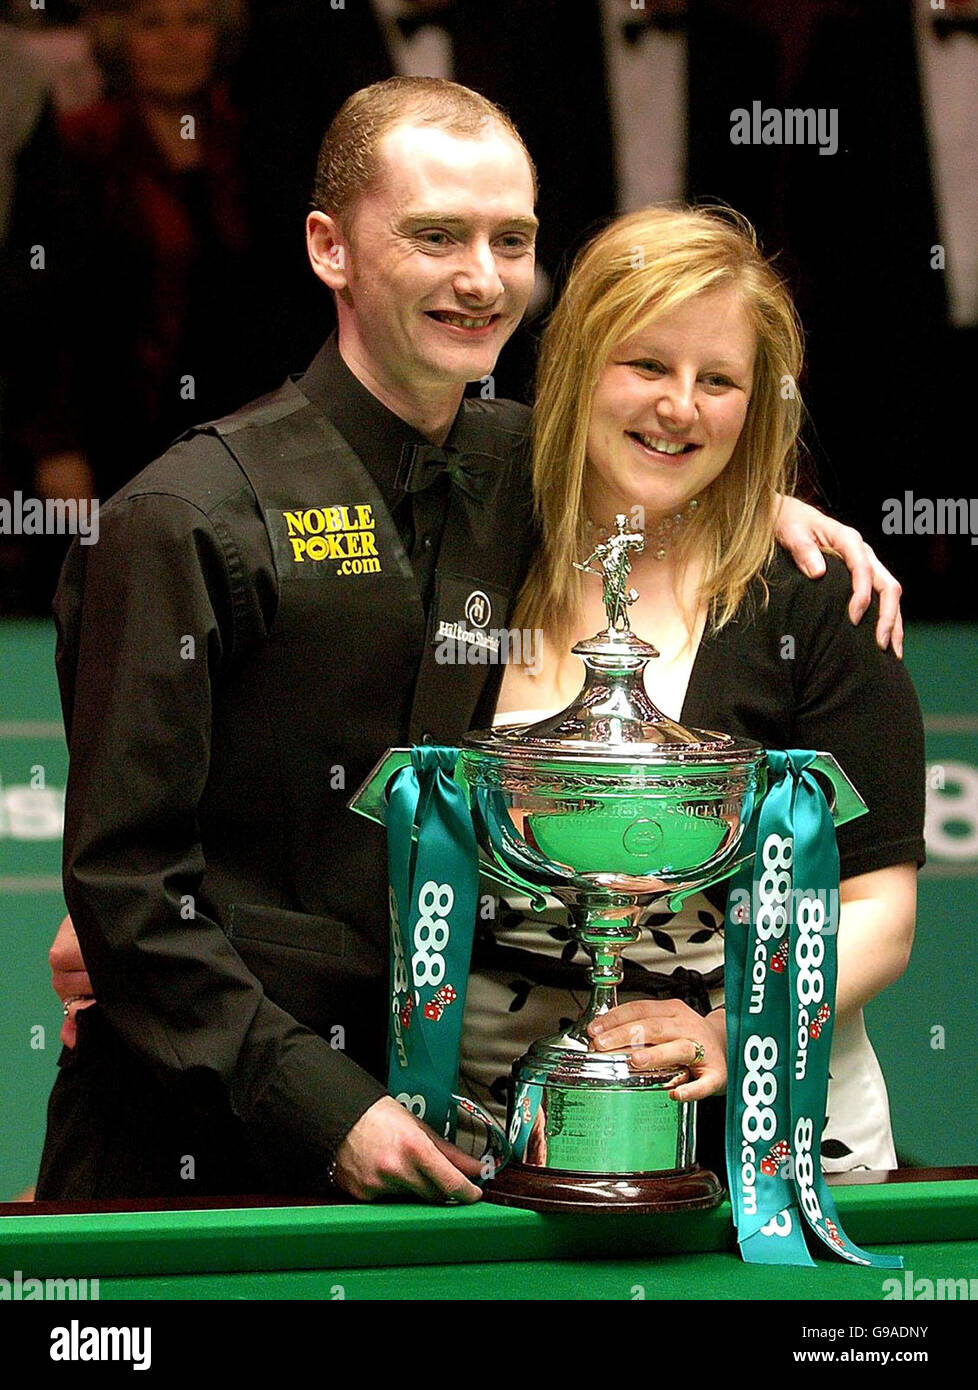 Scotland's Graeme Dott celebrates with his wife Elaine and the trophy after his 18-14 win against England's Peter Ebdon in the Final of the World Snooker Championships at the Crucible Theatre, Sheffield. Stock Photo